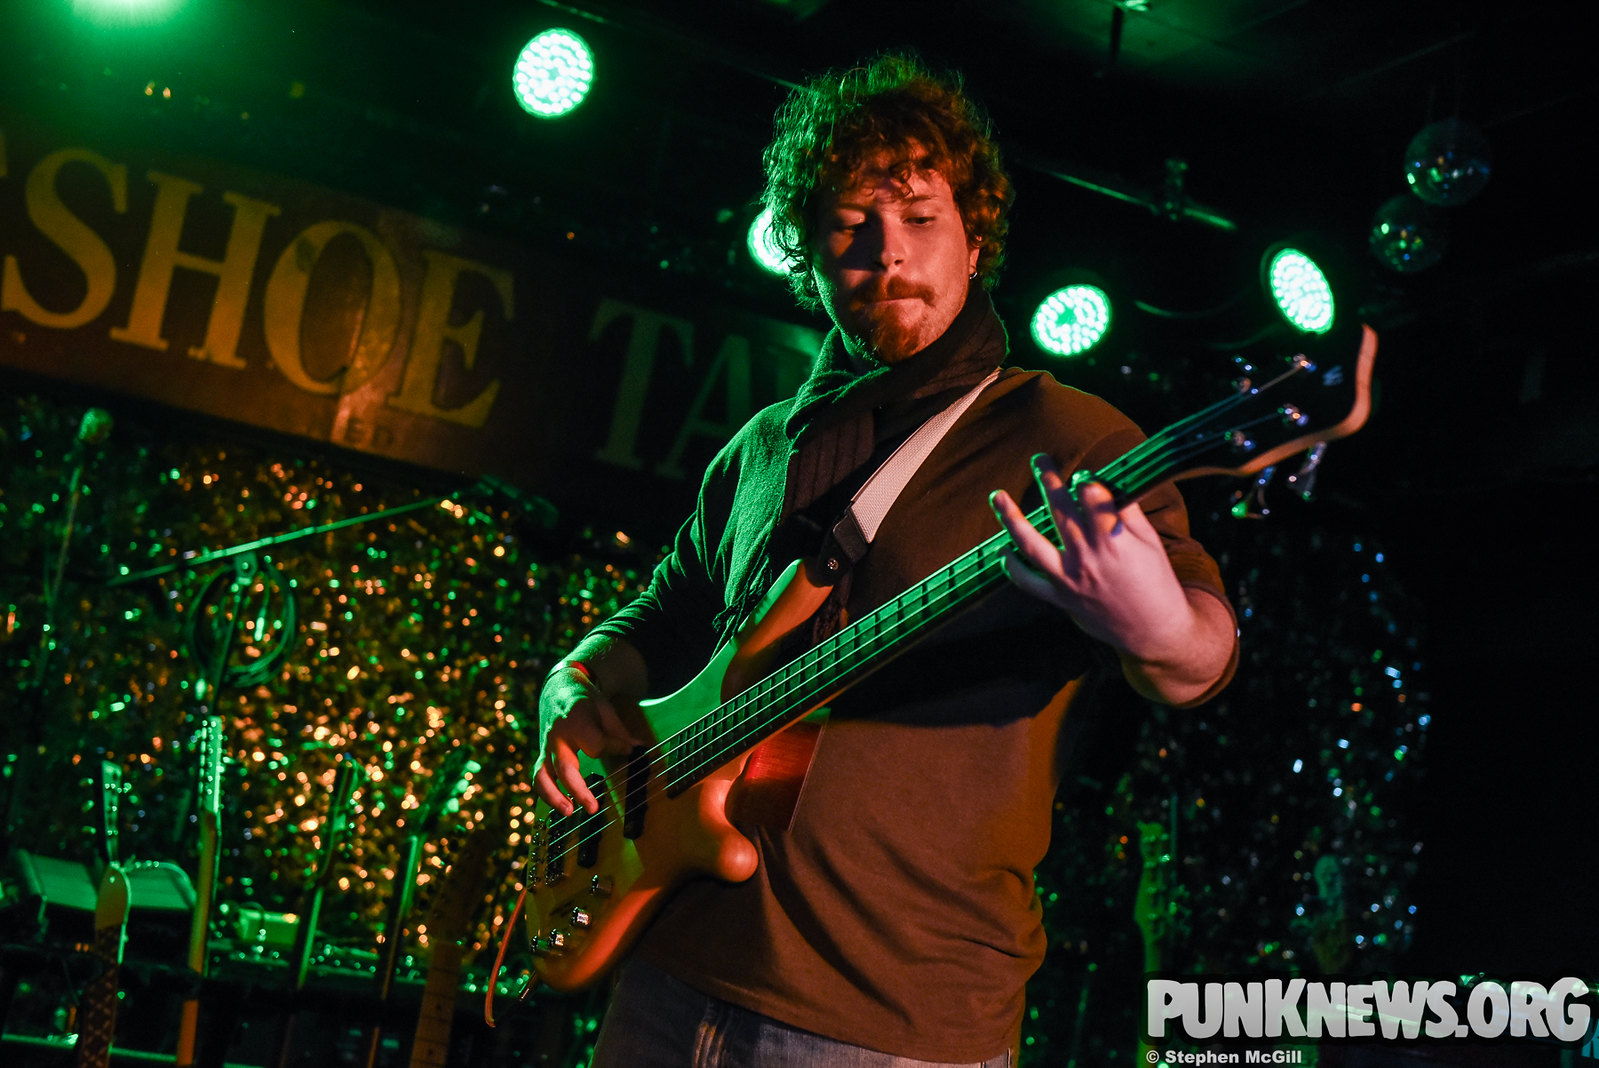 Spring Silver at The Horseshoe Tavern, 11/11